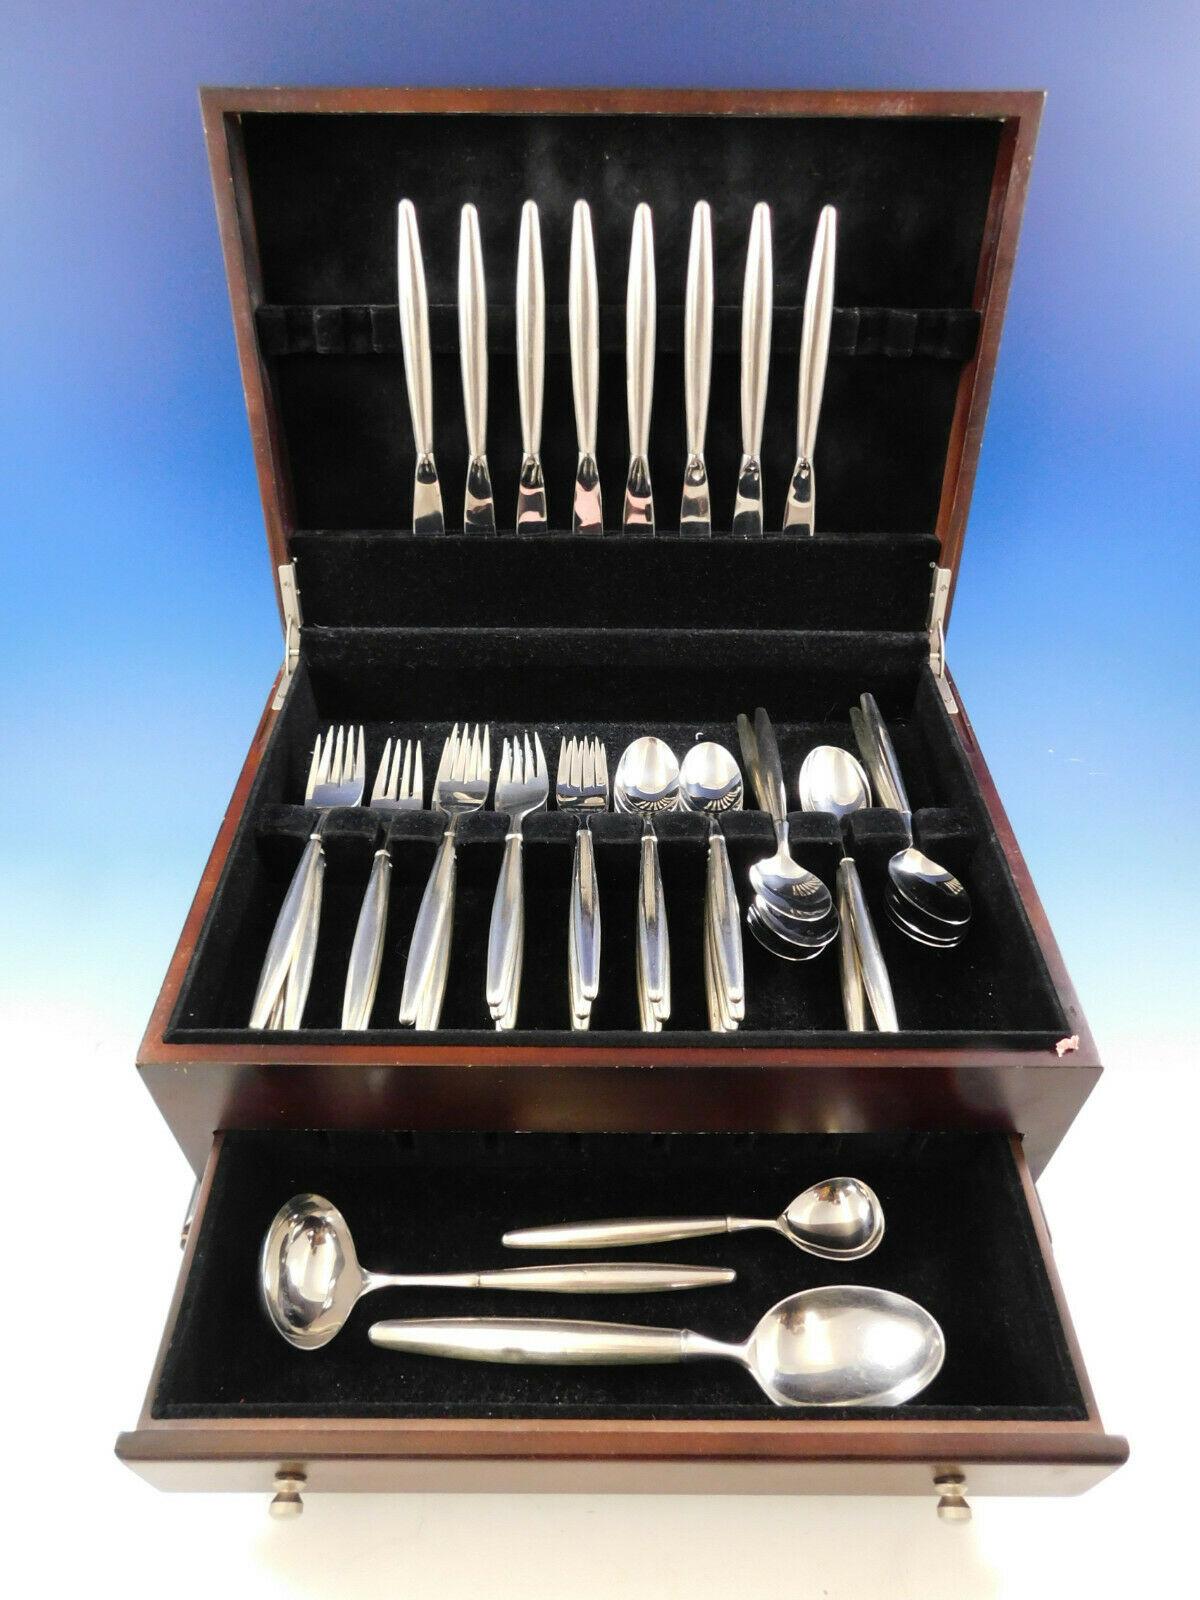 Mid-Century Modern Contempra House sterling silver & stainless flatware set, 43 pieces. All of the pieces in this pattern are hollow handle with stainless. This set includes:

8 knives, 8 1/2